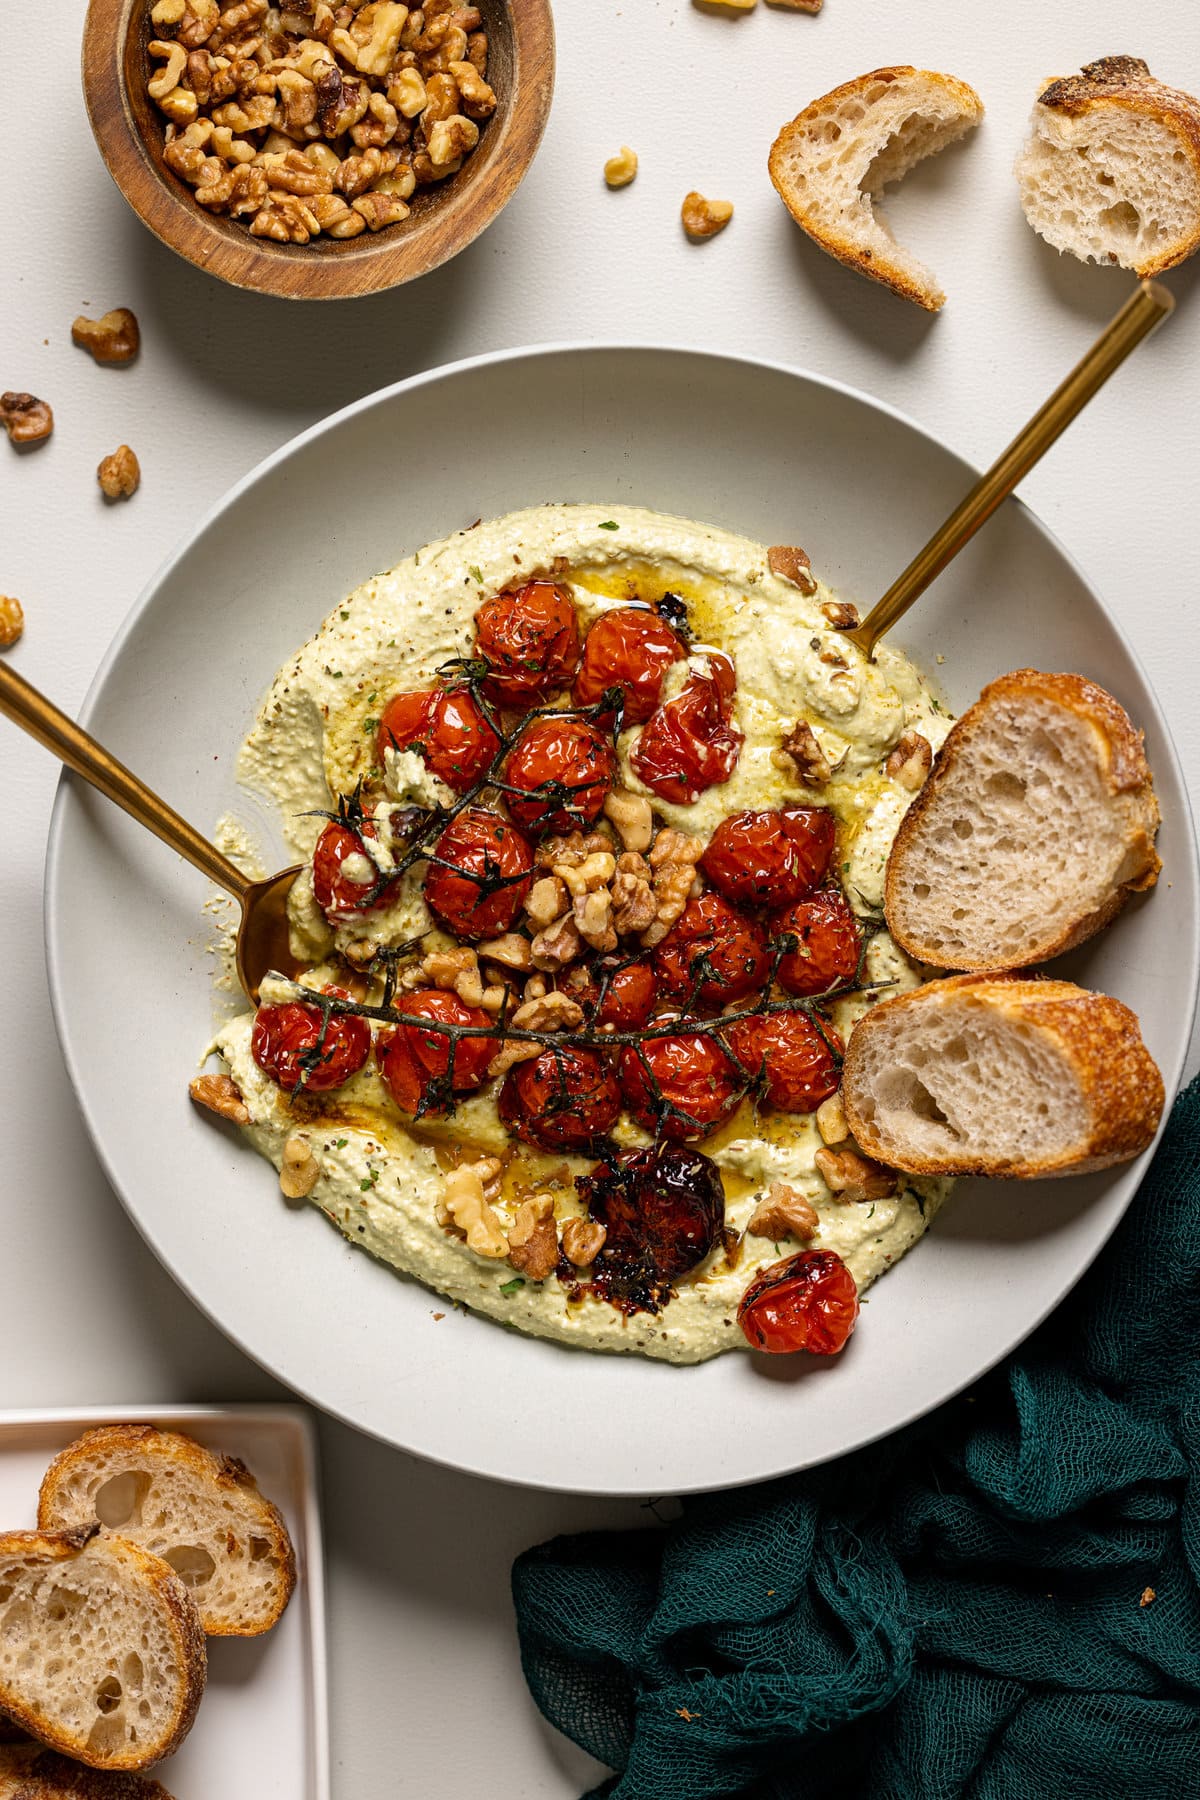 Whipped feta dip with bread.